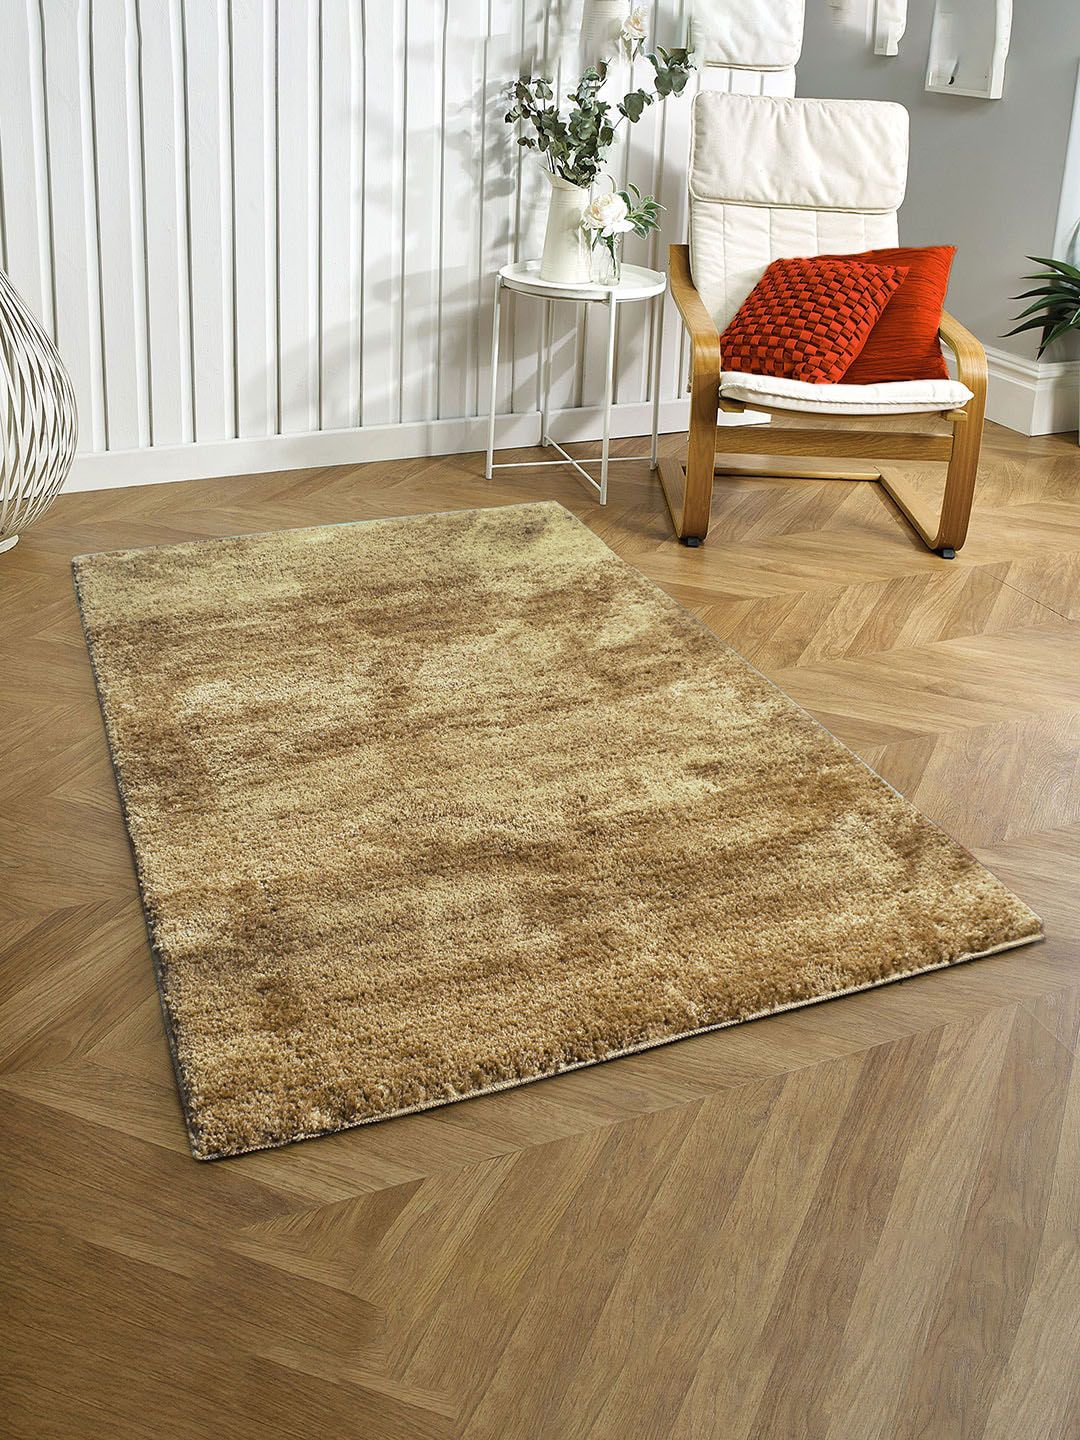 LUXEHOME INTERNATIONAL Yellow Solid Anti-Skid Rectangular Carpet Price in India